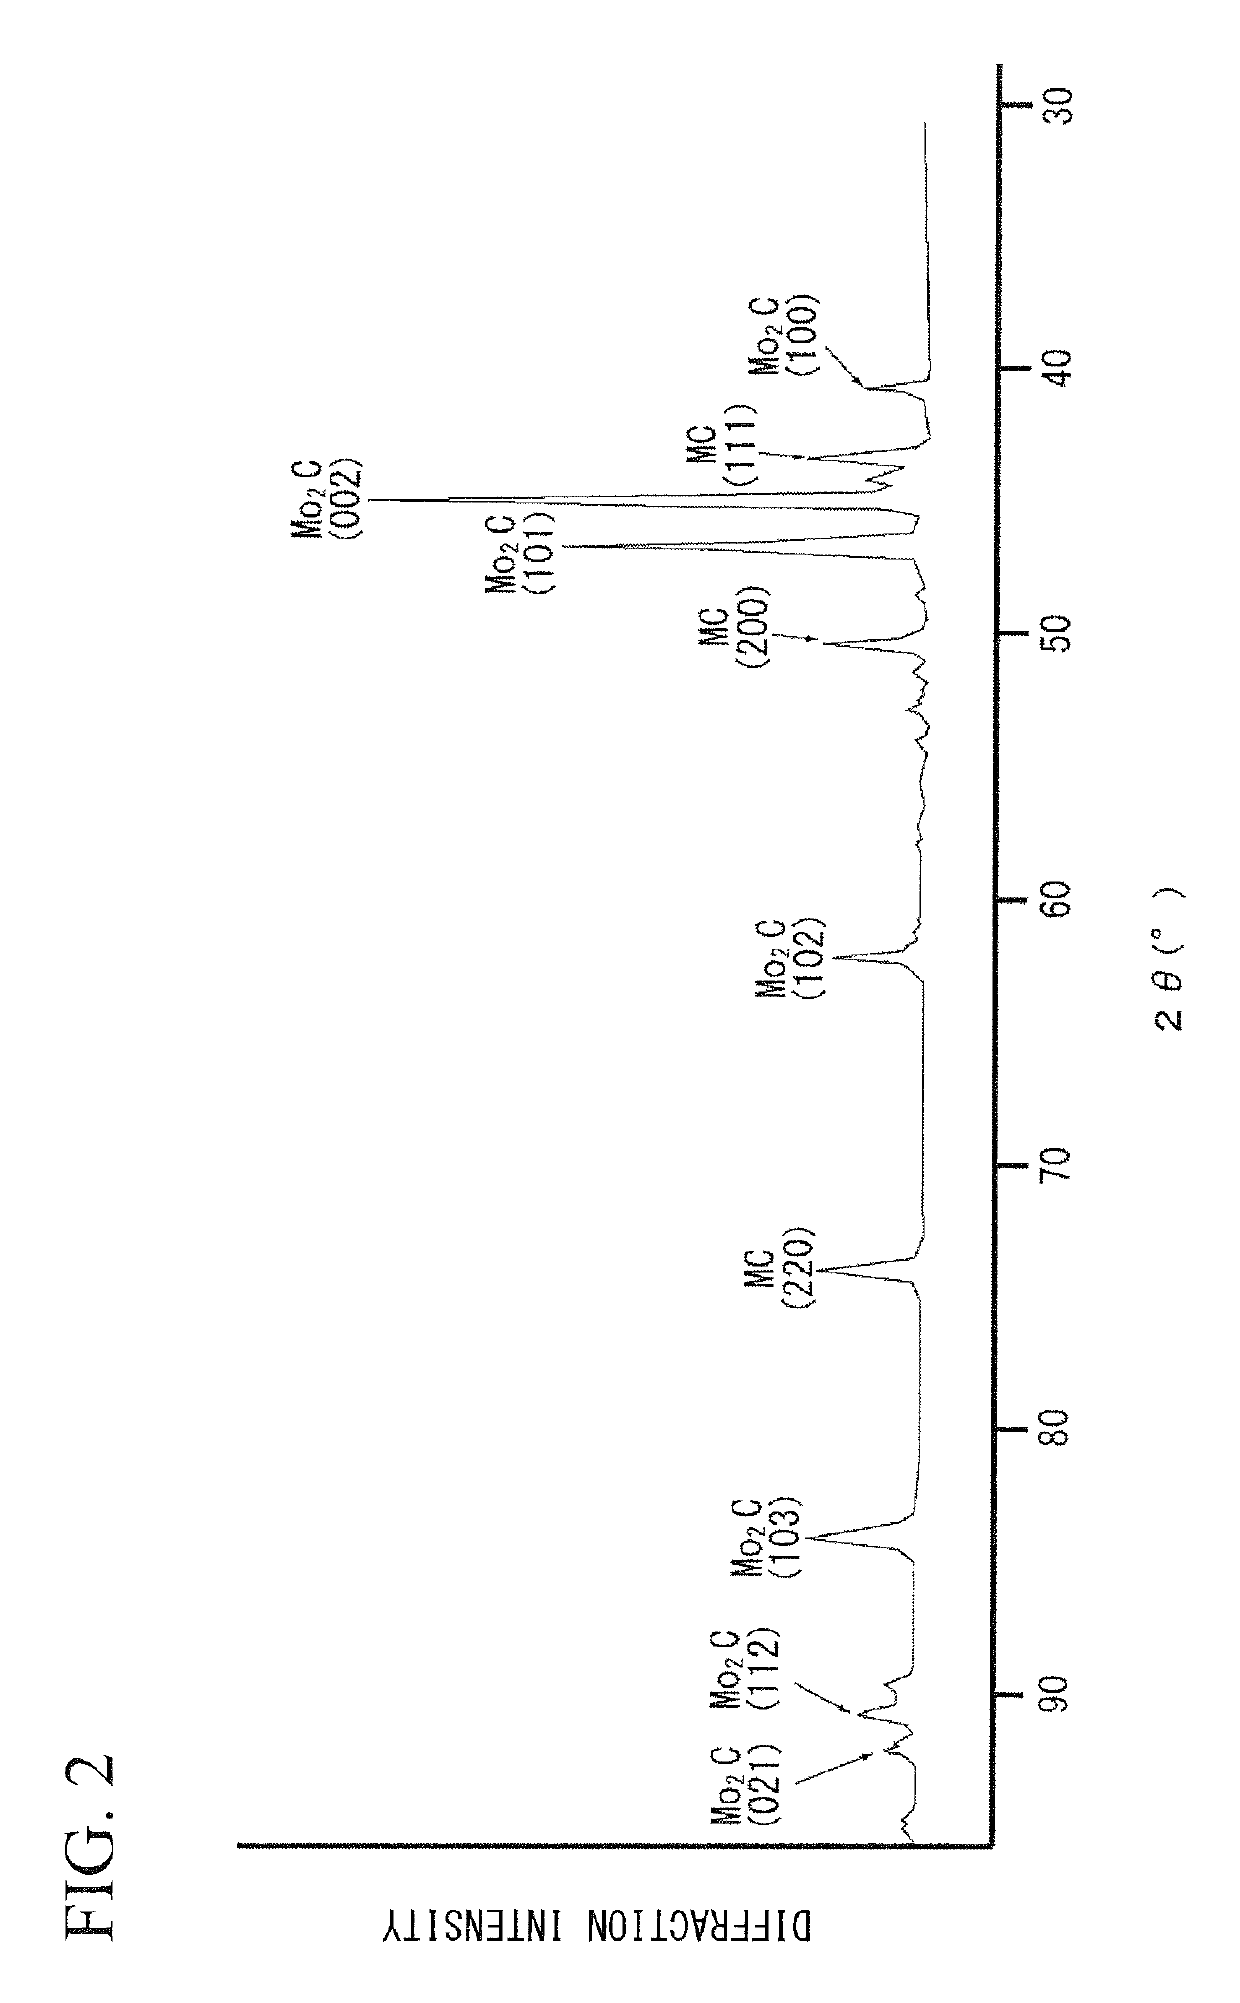 Steel for oil country tubular goods and method of producing the same